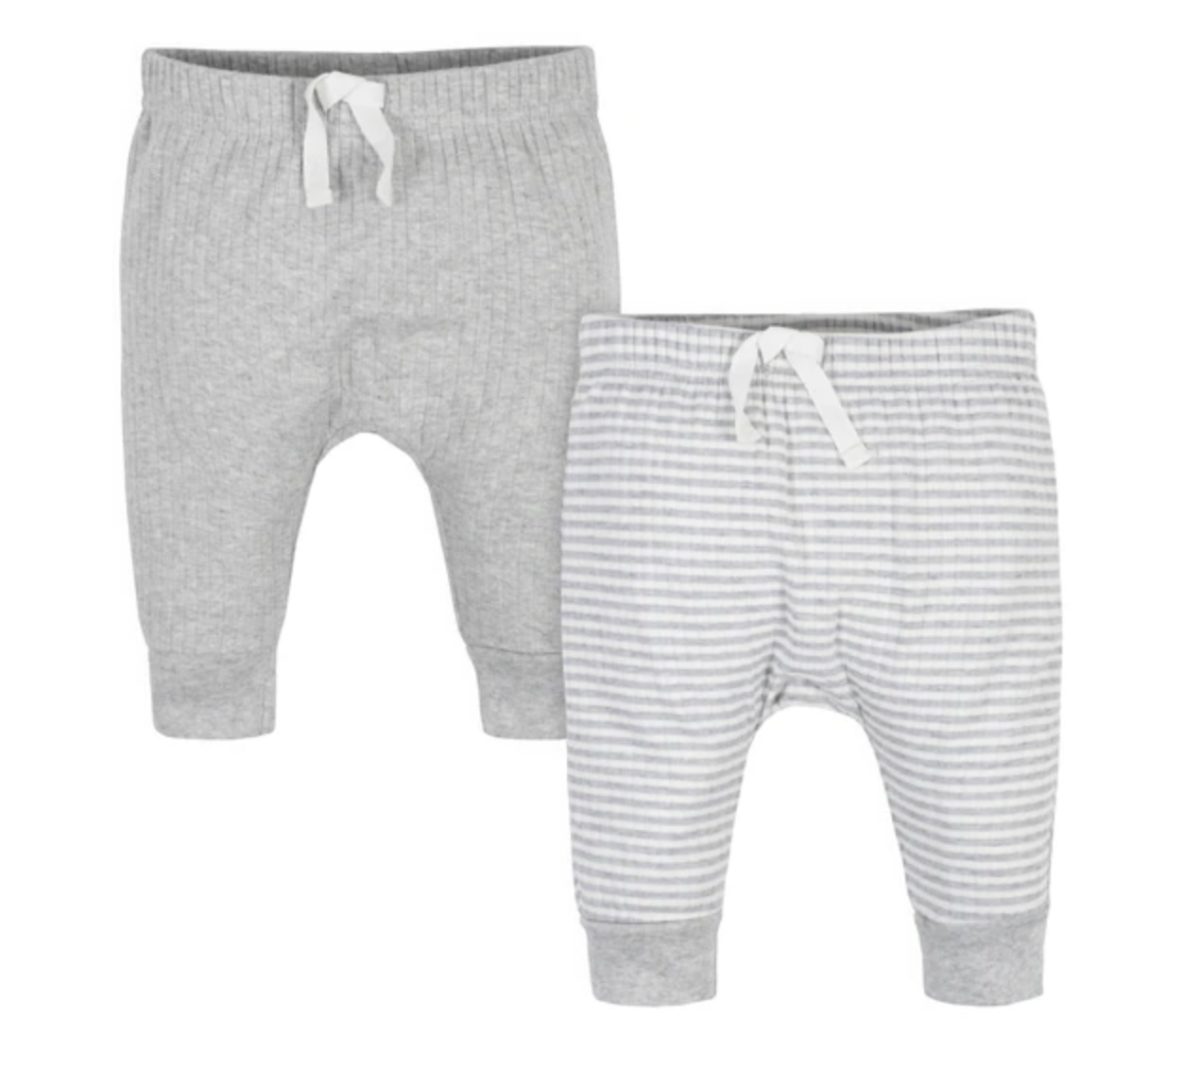 Check Out These Top-Selling Items From Gerber's Childrenswear Line | Here are some of their top-selling pieces for you to buy for your own little one or if you have a baby shower coming up, these items will make great gifts!